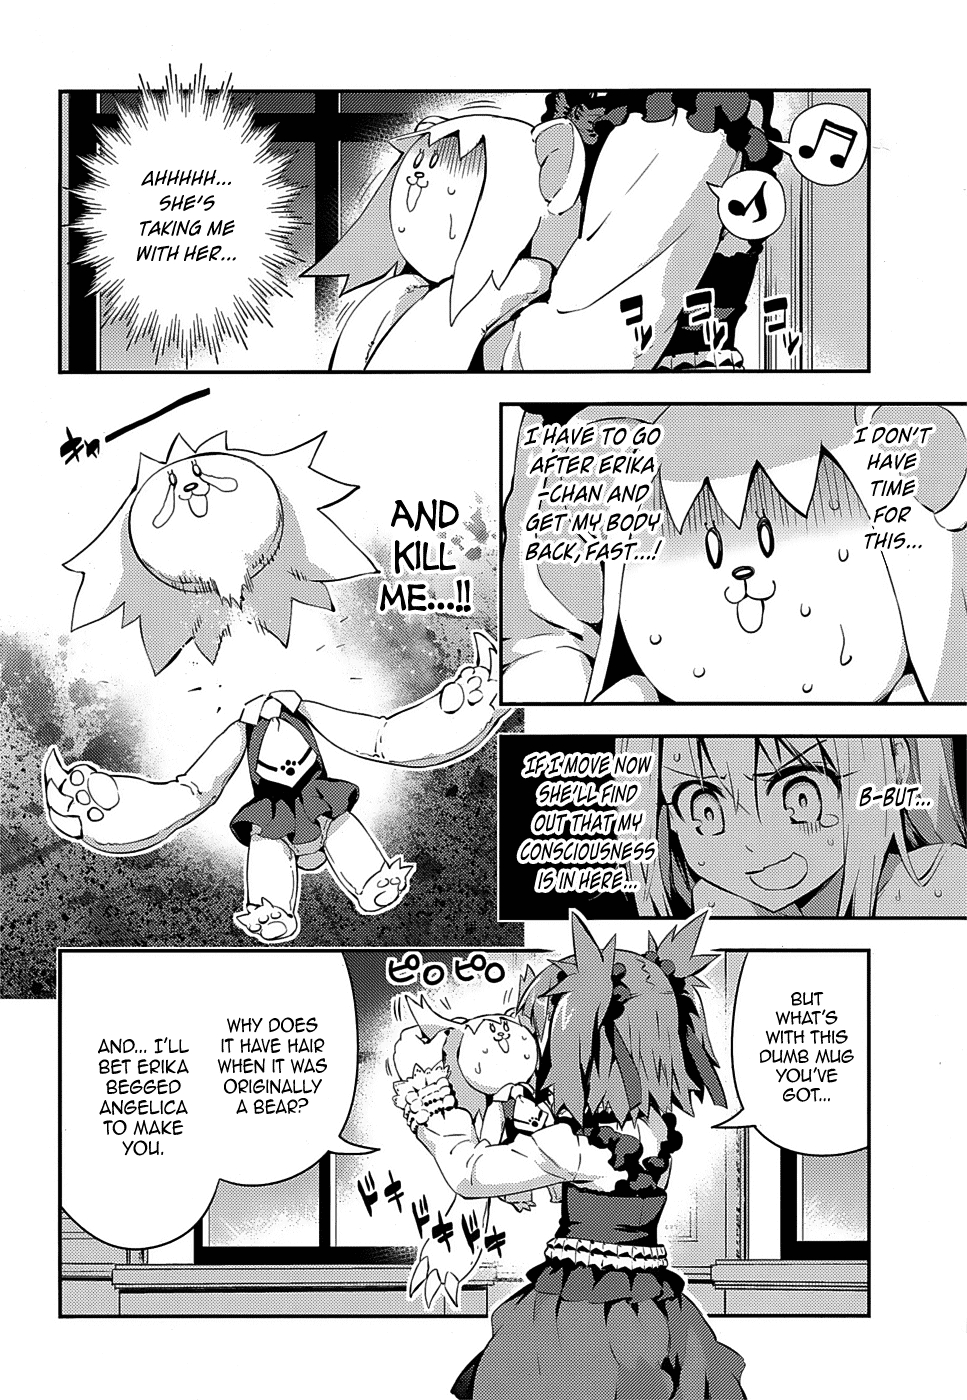 Fate/kaleid liner PRISMA☆ILLYA 3rei!! Vol. 3 Ch. 14 A Young Lady's Room